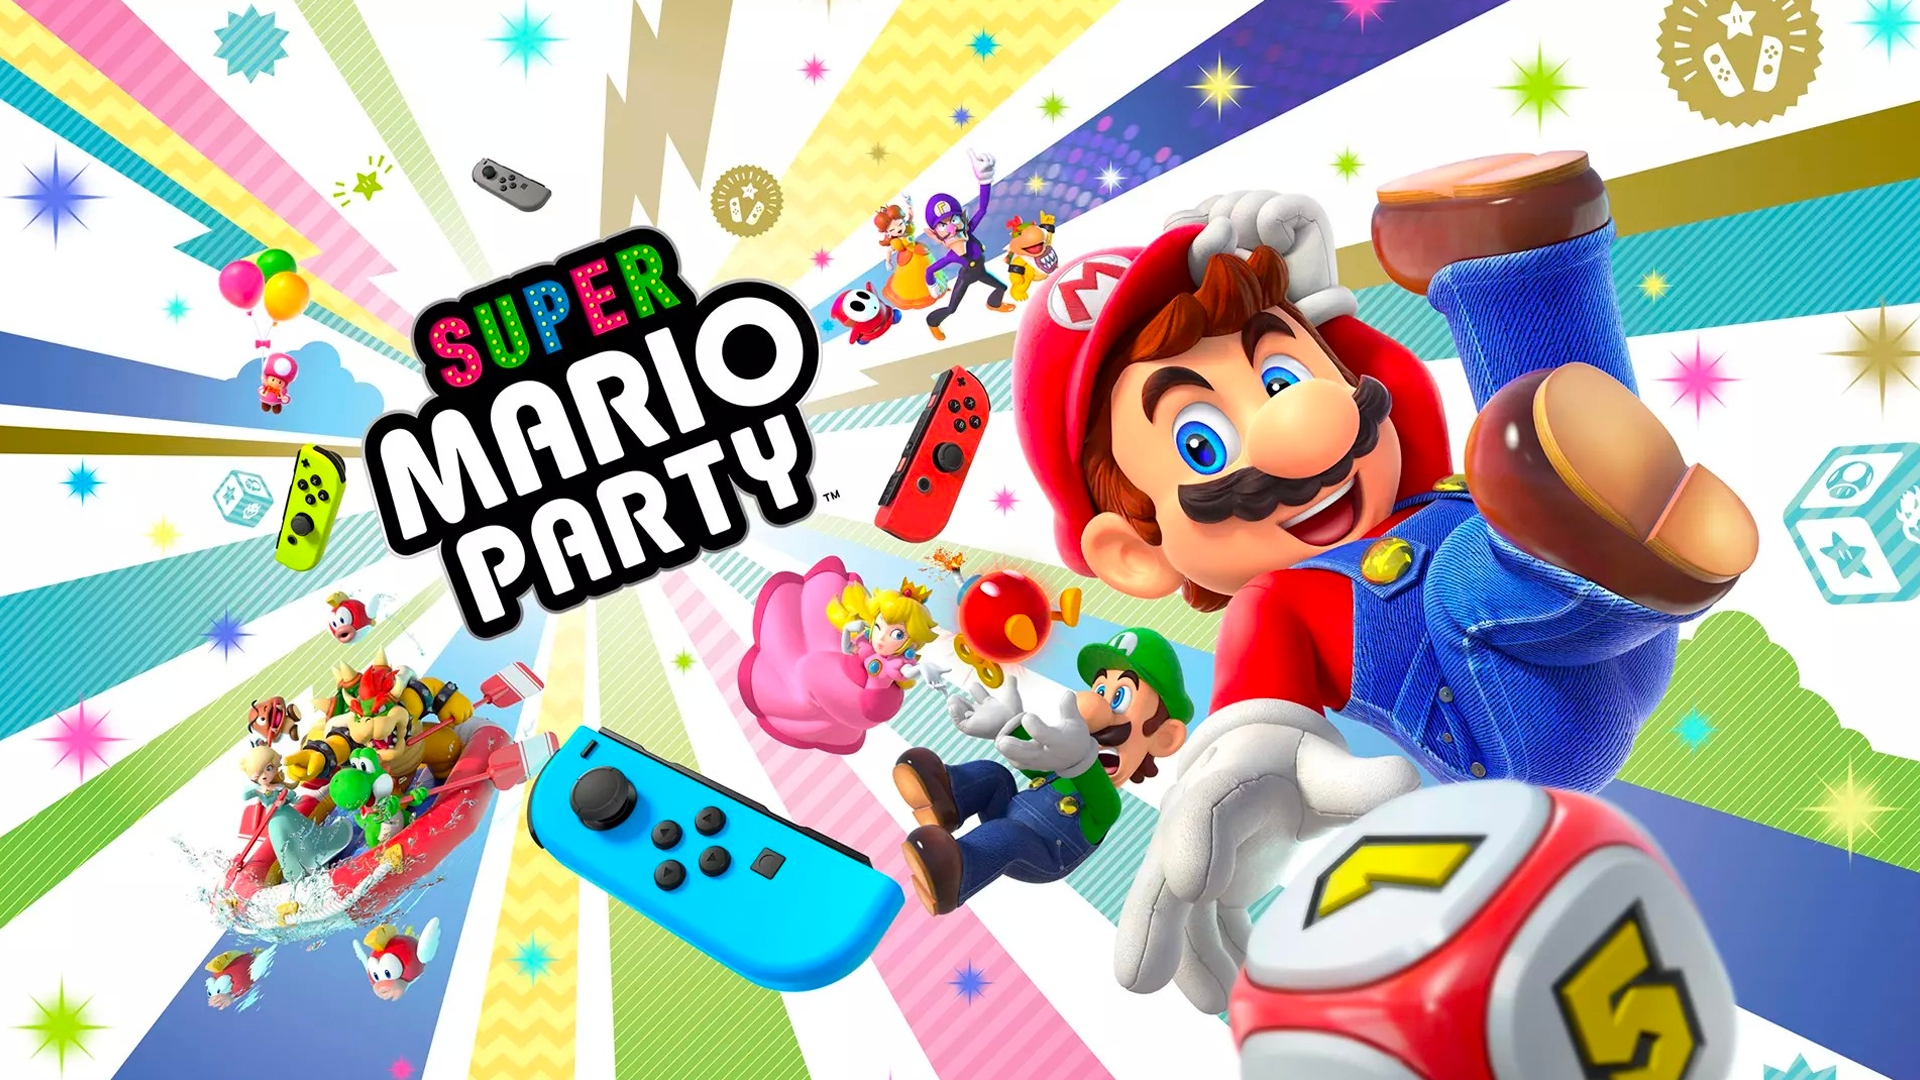 https://gaming-cdn.com/images/products/3002/orig/super-mario-party-switch-switch-game-nintendo-eshop-europe-cover.jpg?v=1701683992